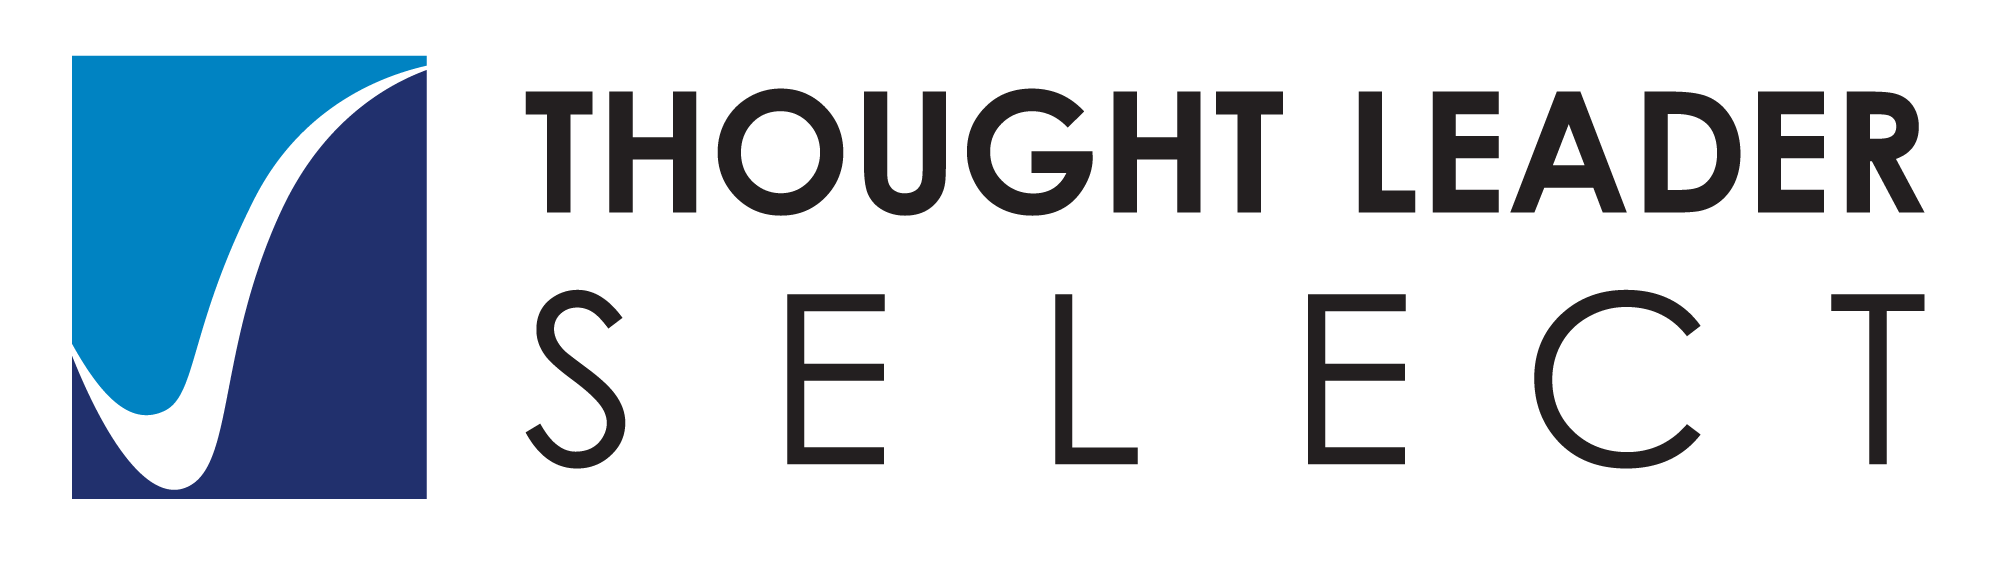 Thought Leader Select Logo